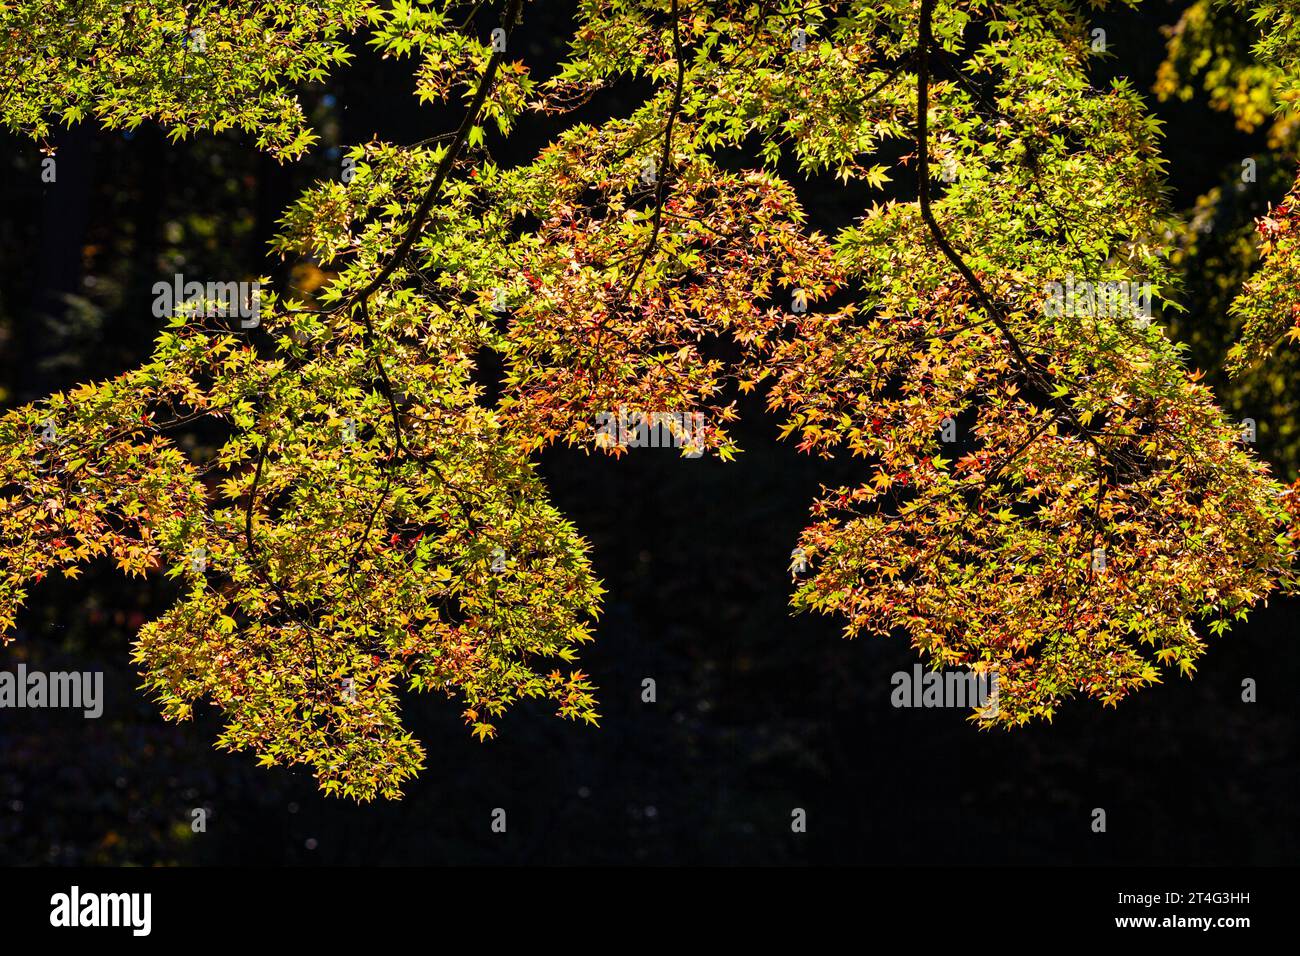 Abstract image of leaves against shadow at Nitobe Japanese Gardens at UBC Vancouver Canada Stock Photo